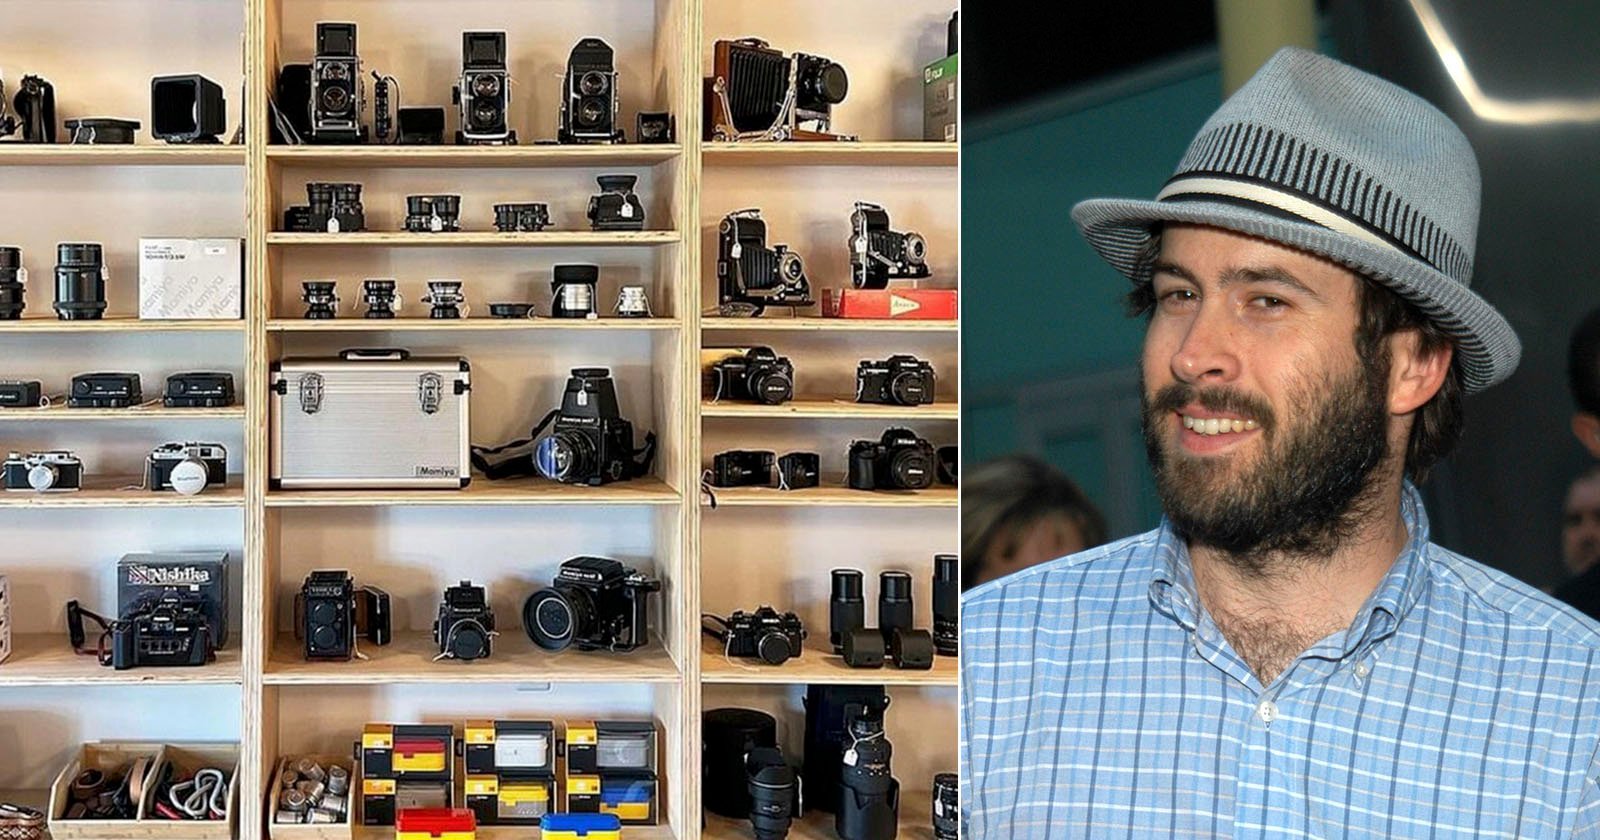 Jason Lee From My Name is Earl Opened a Camera Store